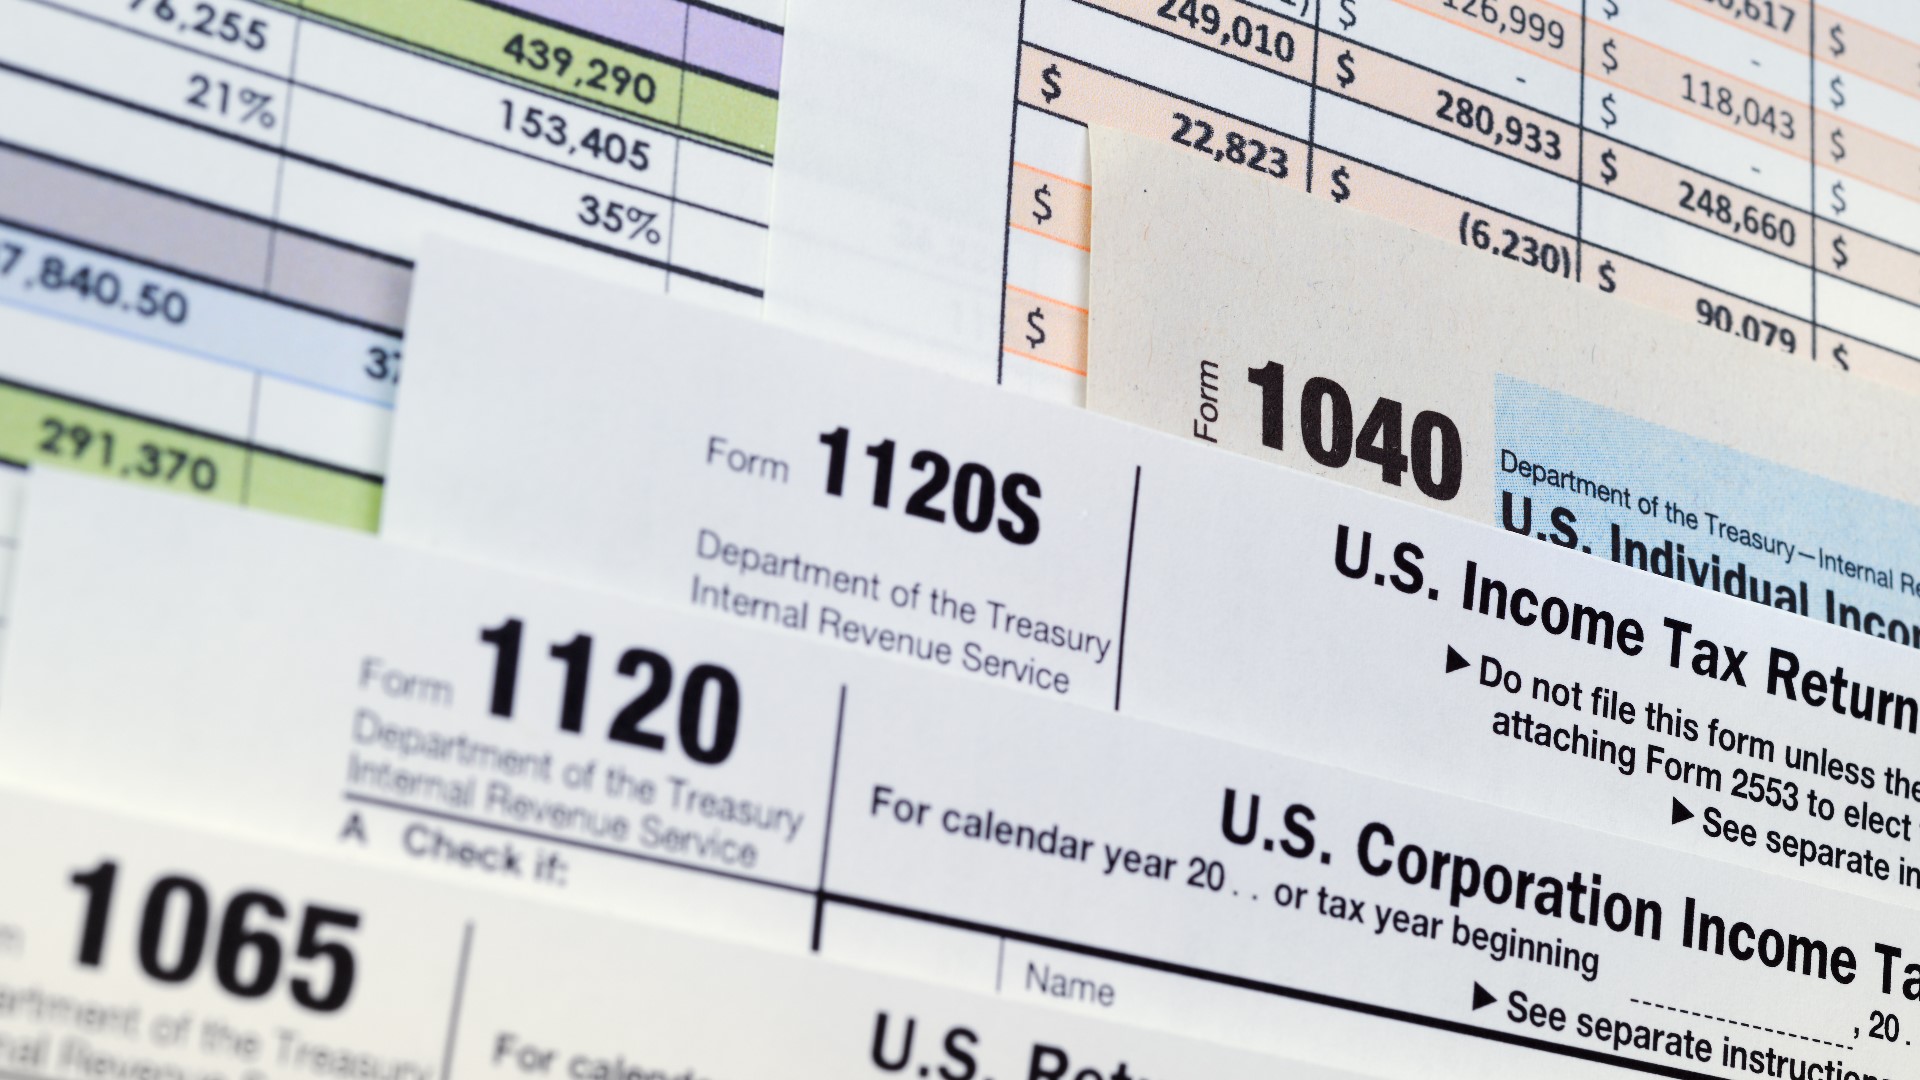 The IRS enters 2022 with a backlog of returns from 2021.